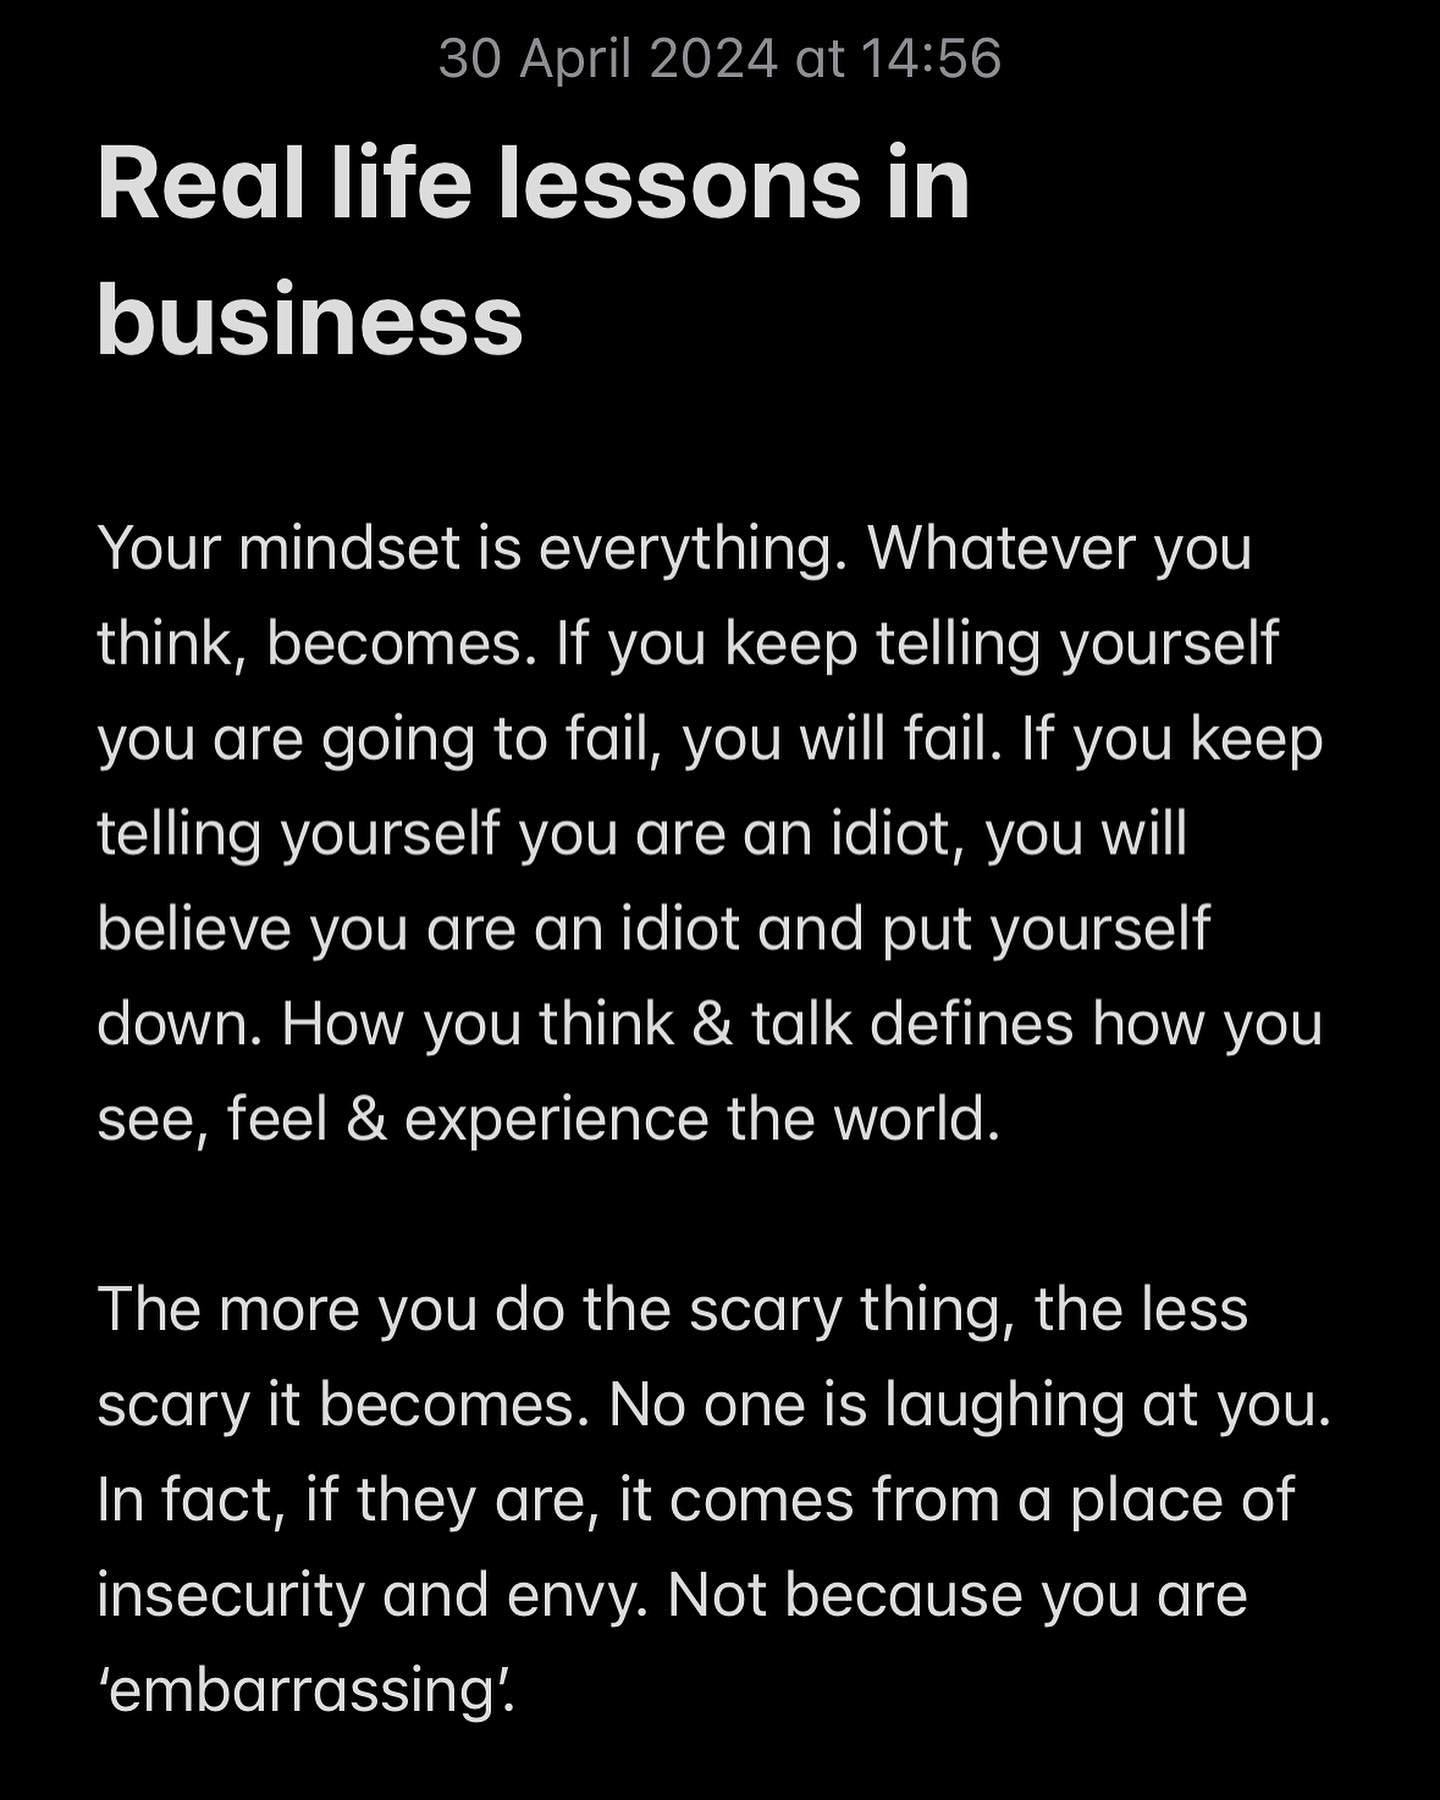 Some real life lessons that have shaped how I think &amp; act&hellip;

What would you add to the list? 

#creativeentrepreneurs #reallifeshit #womeninbusinessuk